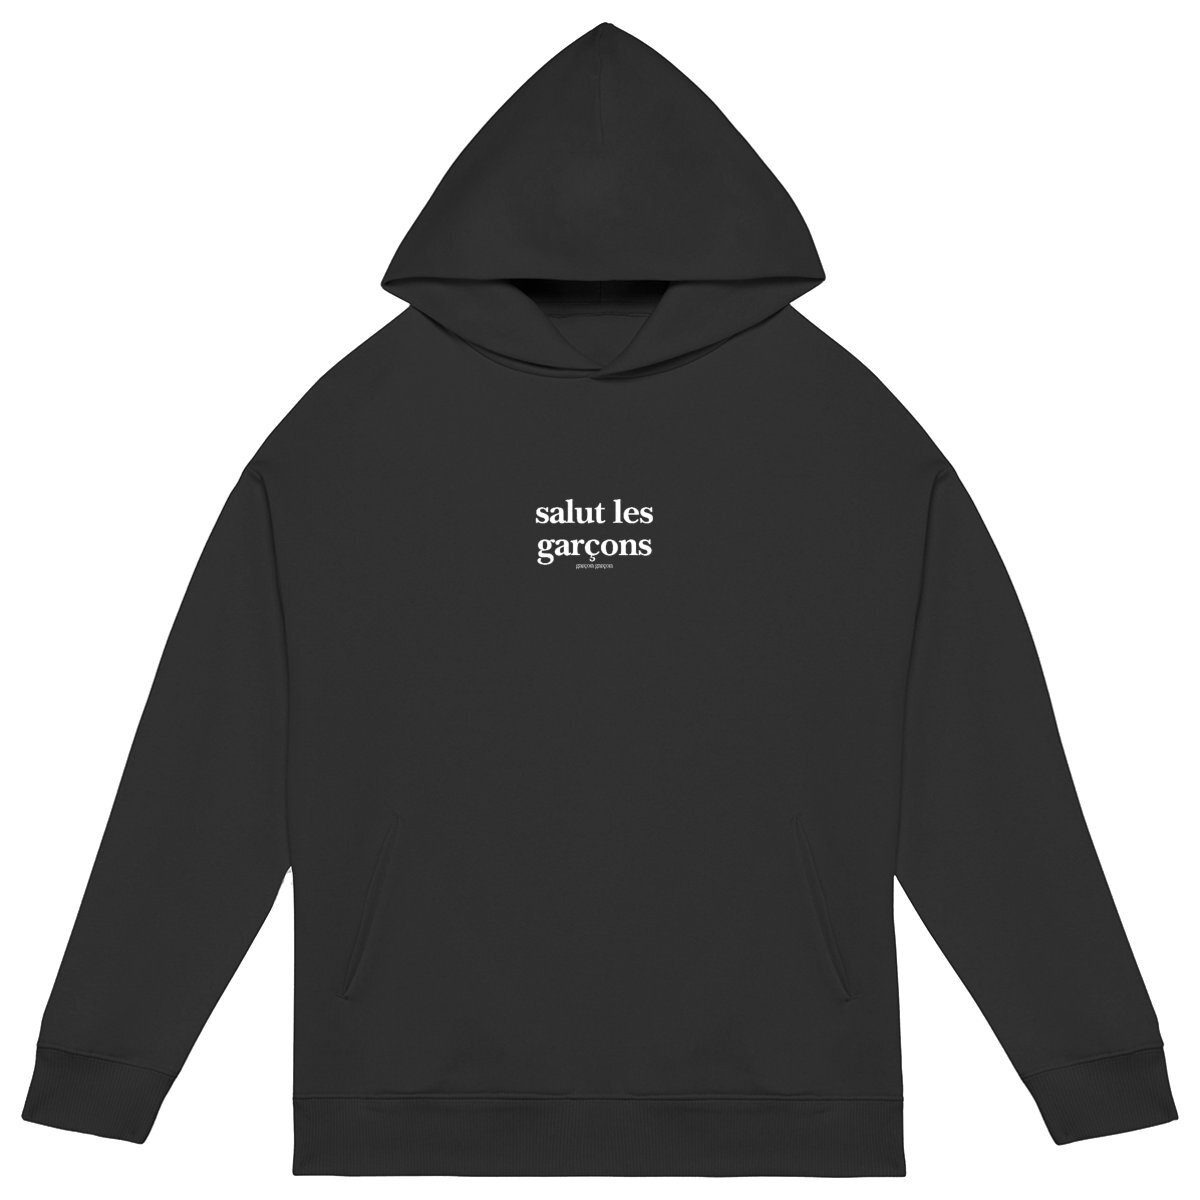 salut les garçons hoodie over. garçon garçon essentiel oversized hoodie. Sleek in black and whispering Parisian chic, this hoodie is the sartorial whisper of 'garçon garçon' — a statement of understated elegance. Perfect for those who carry a piece of Paris in their hearts and a touch of audacity on their sleeves.